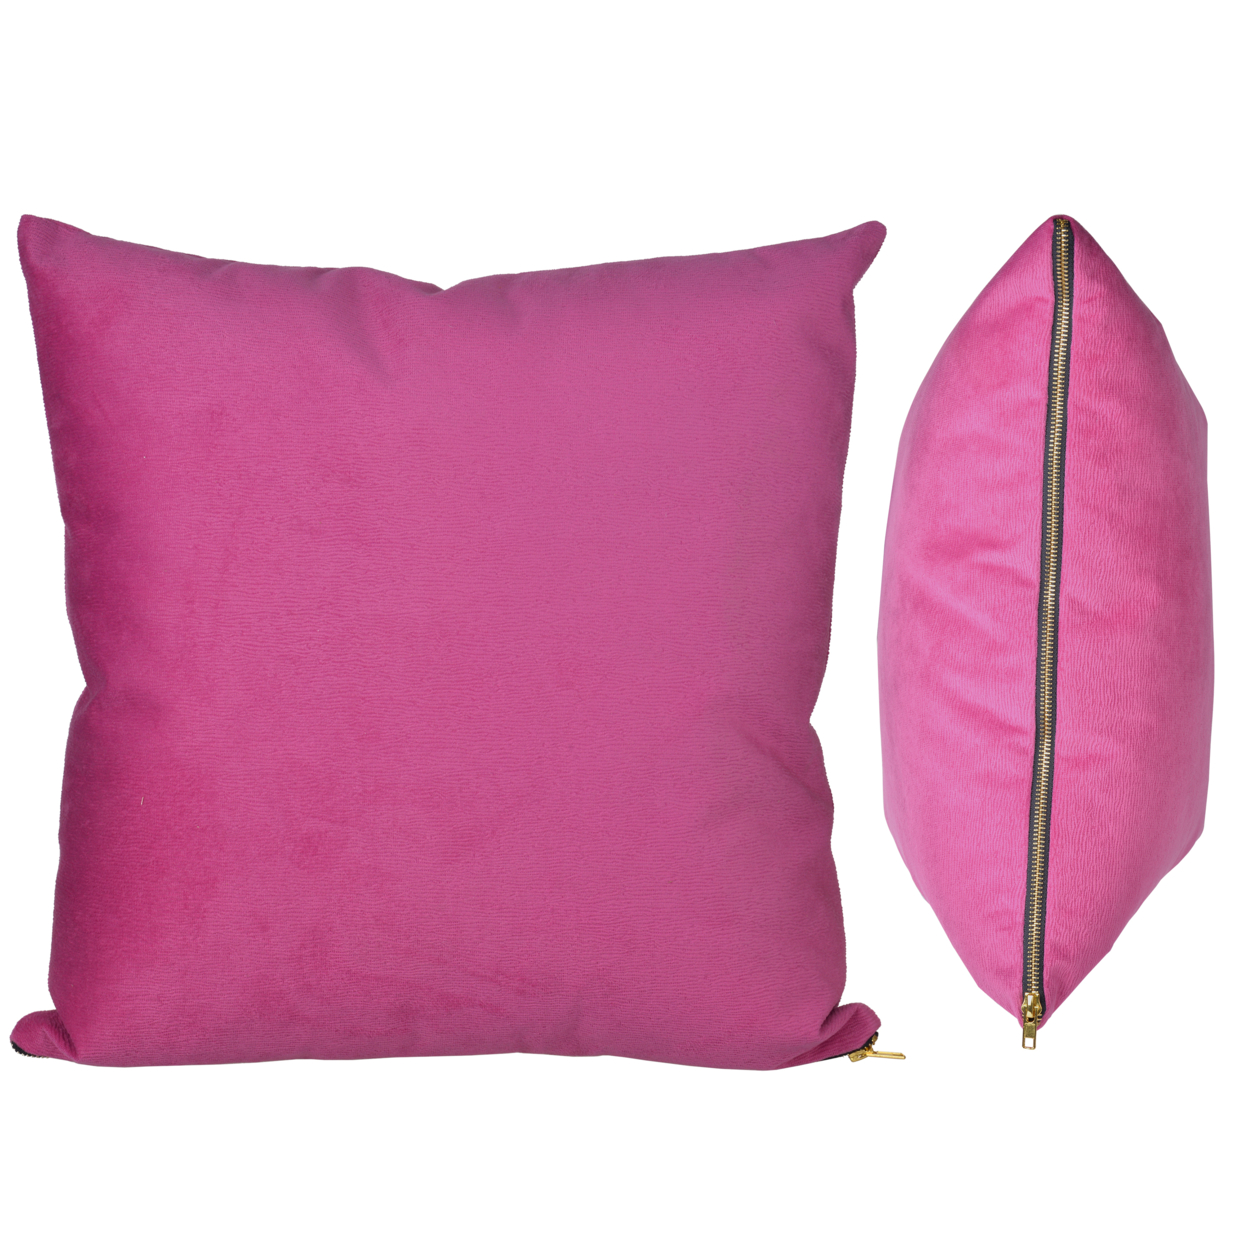 18 X 18 Inch Polyester Cover Pillow With Zipper Opening, Set Of 2, Pink- Saltoro Sherpi